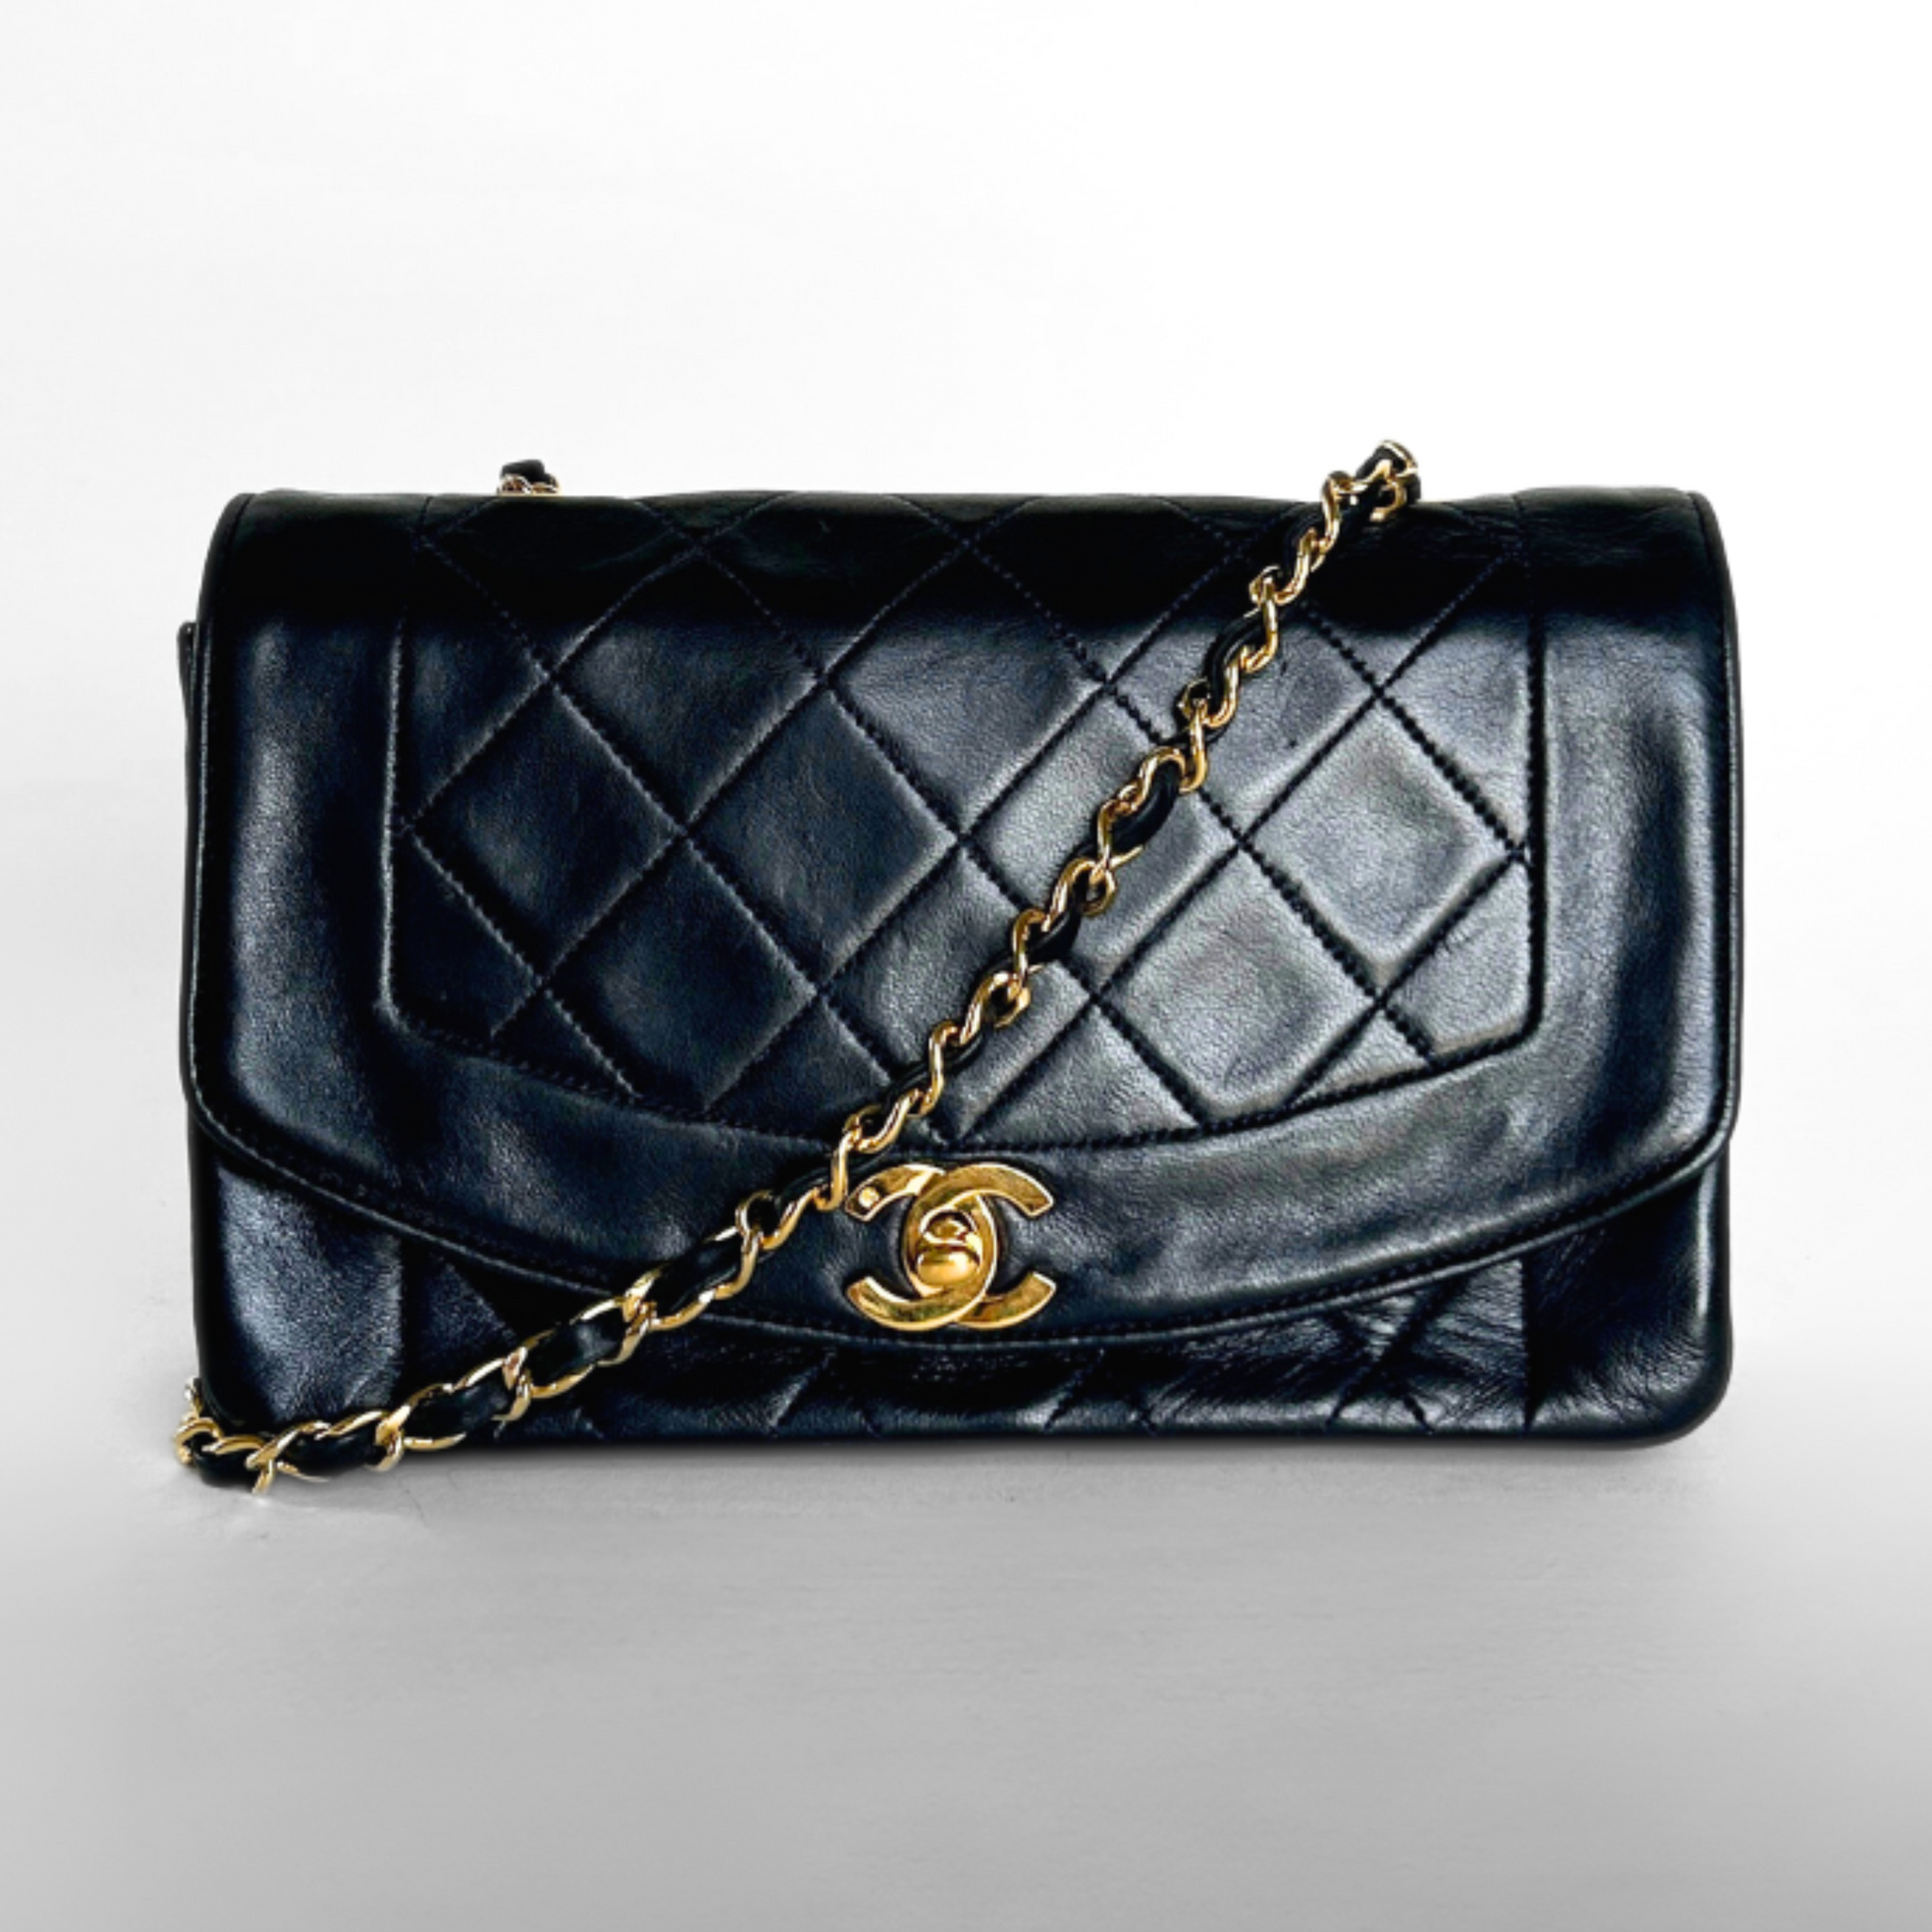 FIT FOR LUXURY: THE CHANEL DIANA FLAP BAG